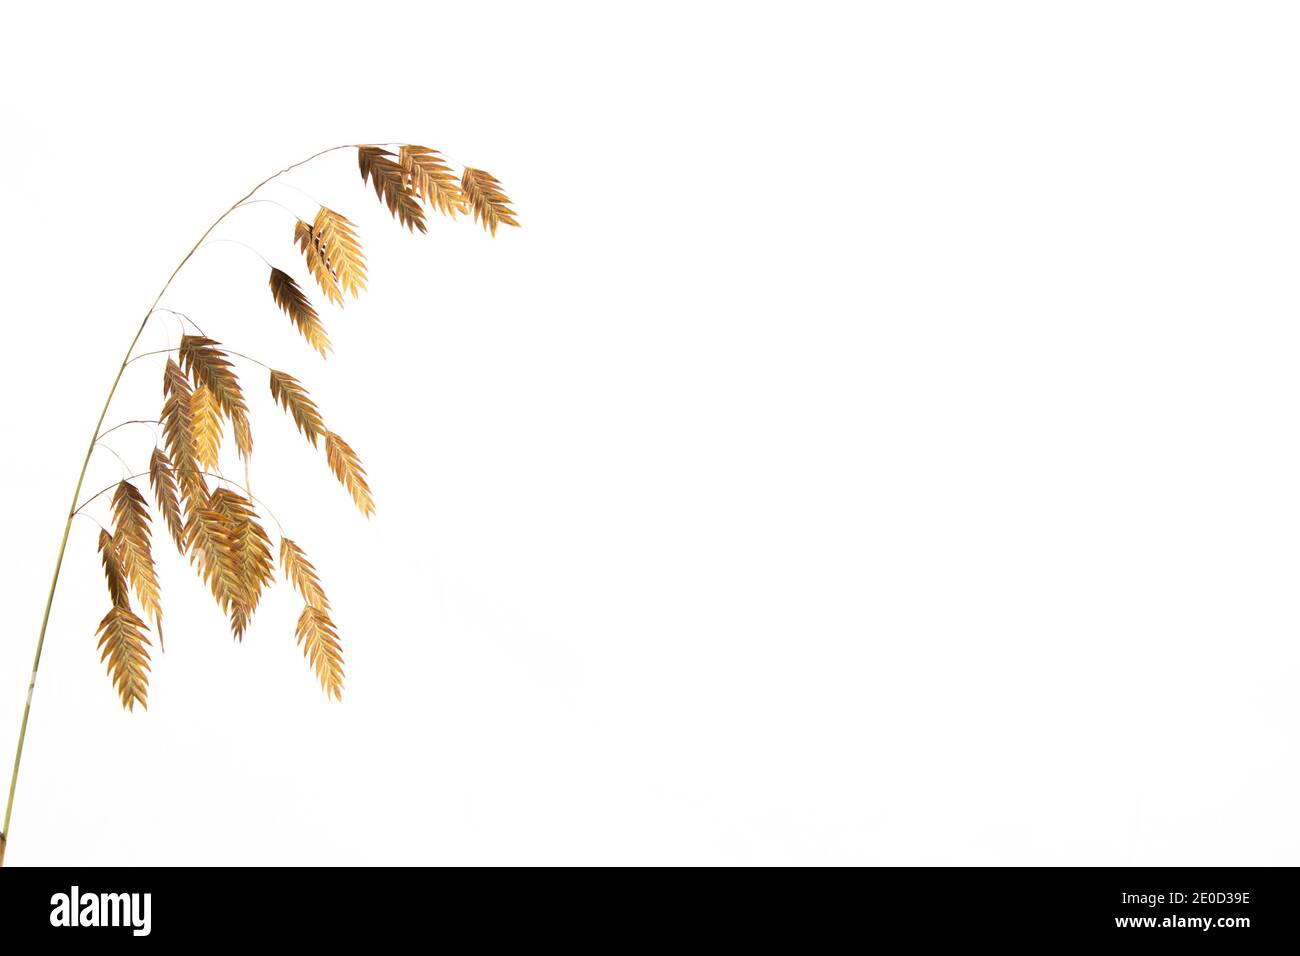 Chasmanthium latifolium or wood oats isolated on white background with copy space, also called Nordseehafer Stock Photo